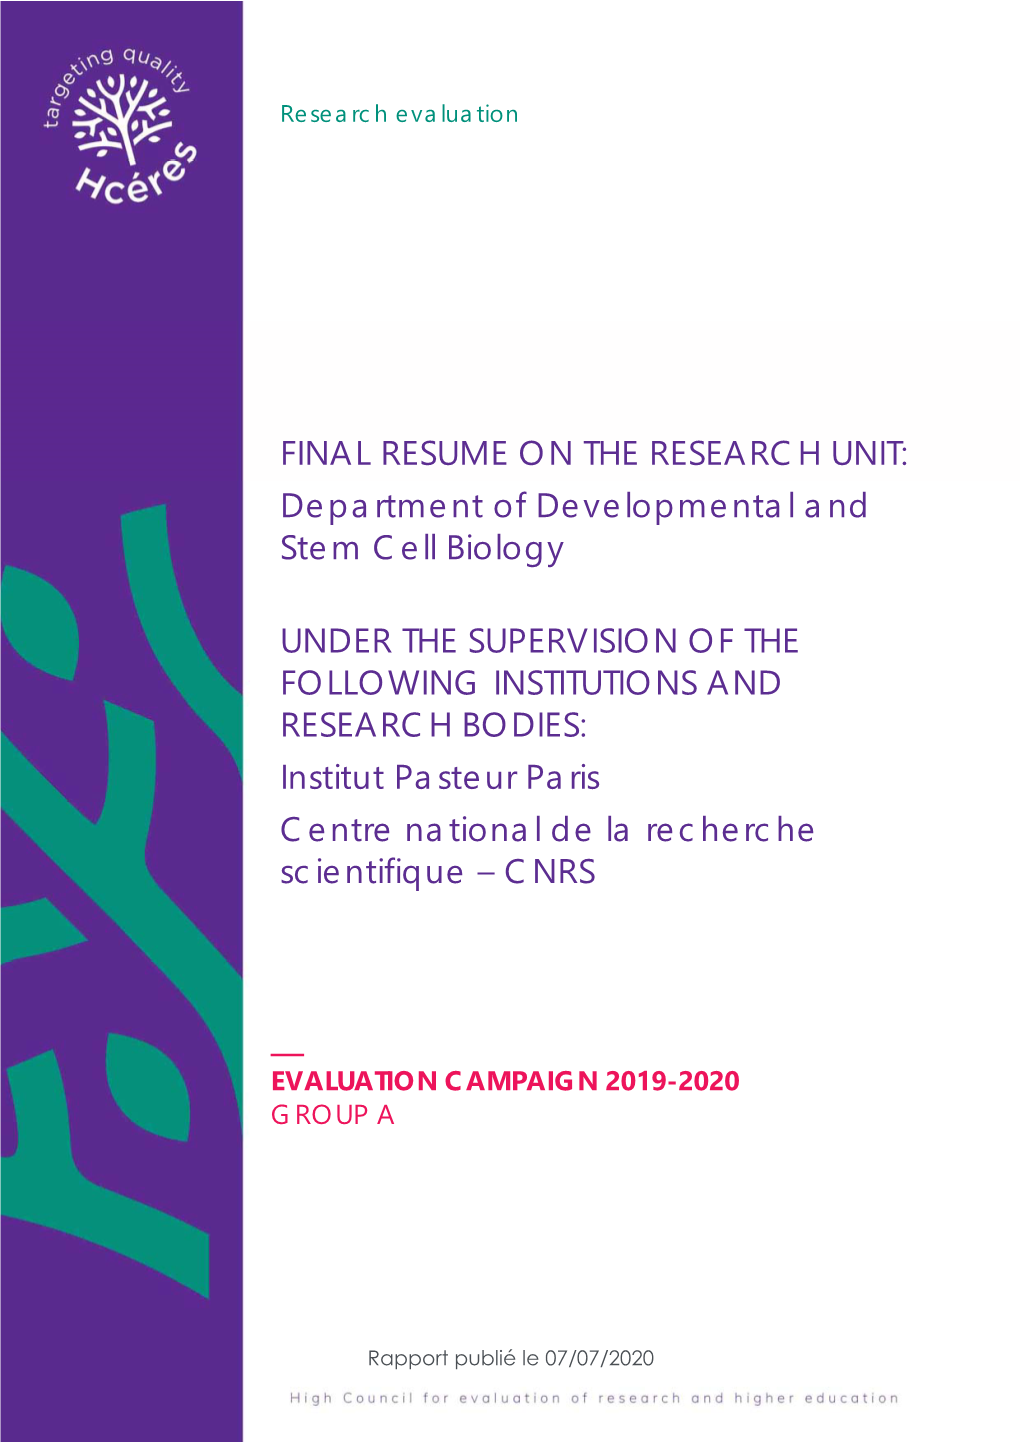 Department of Developmental and Stem Cell Biology